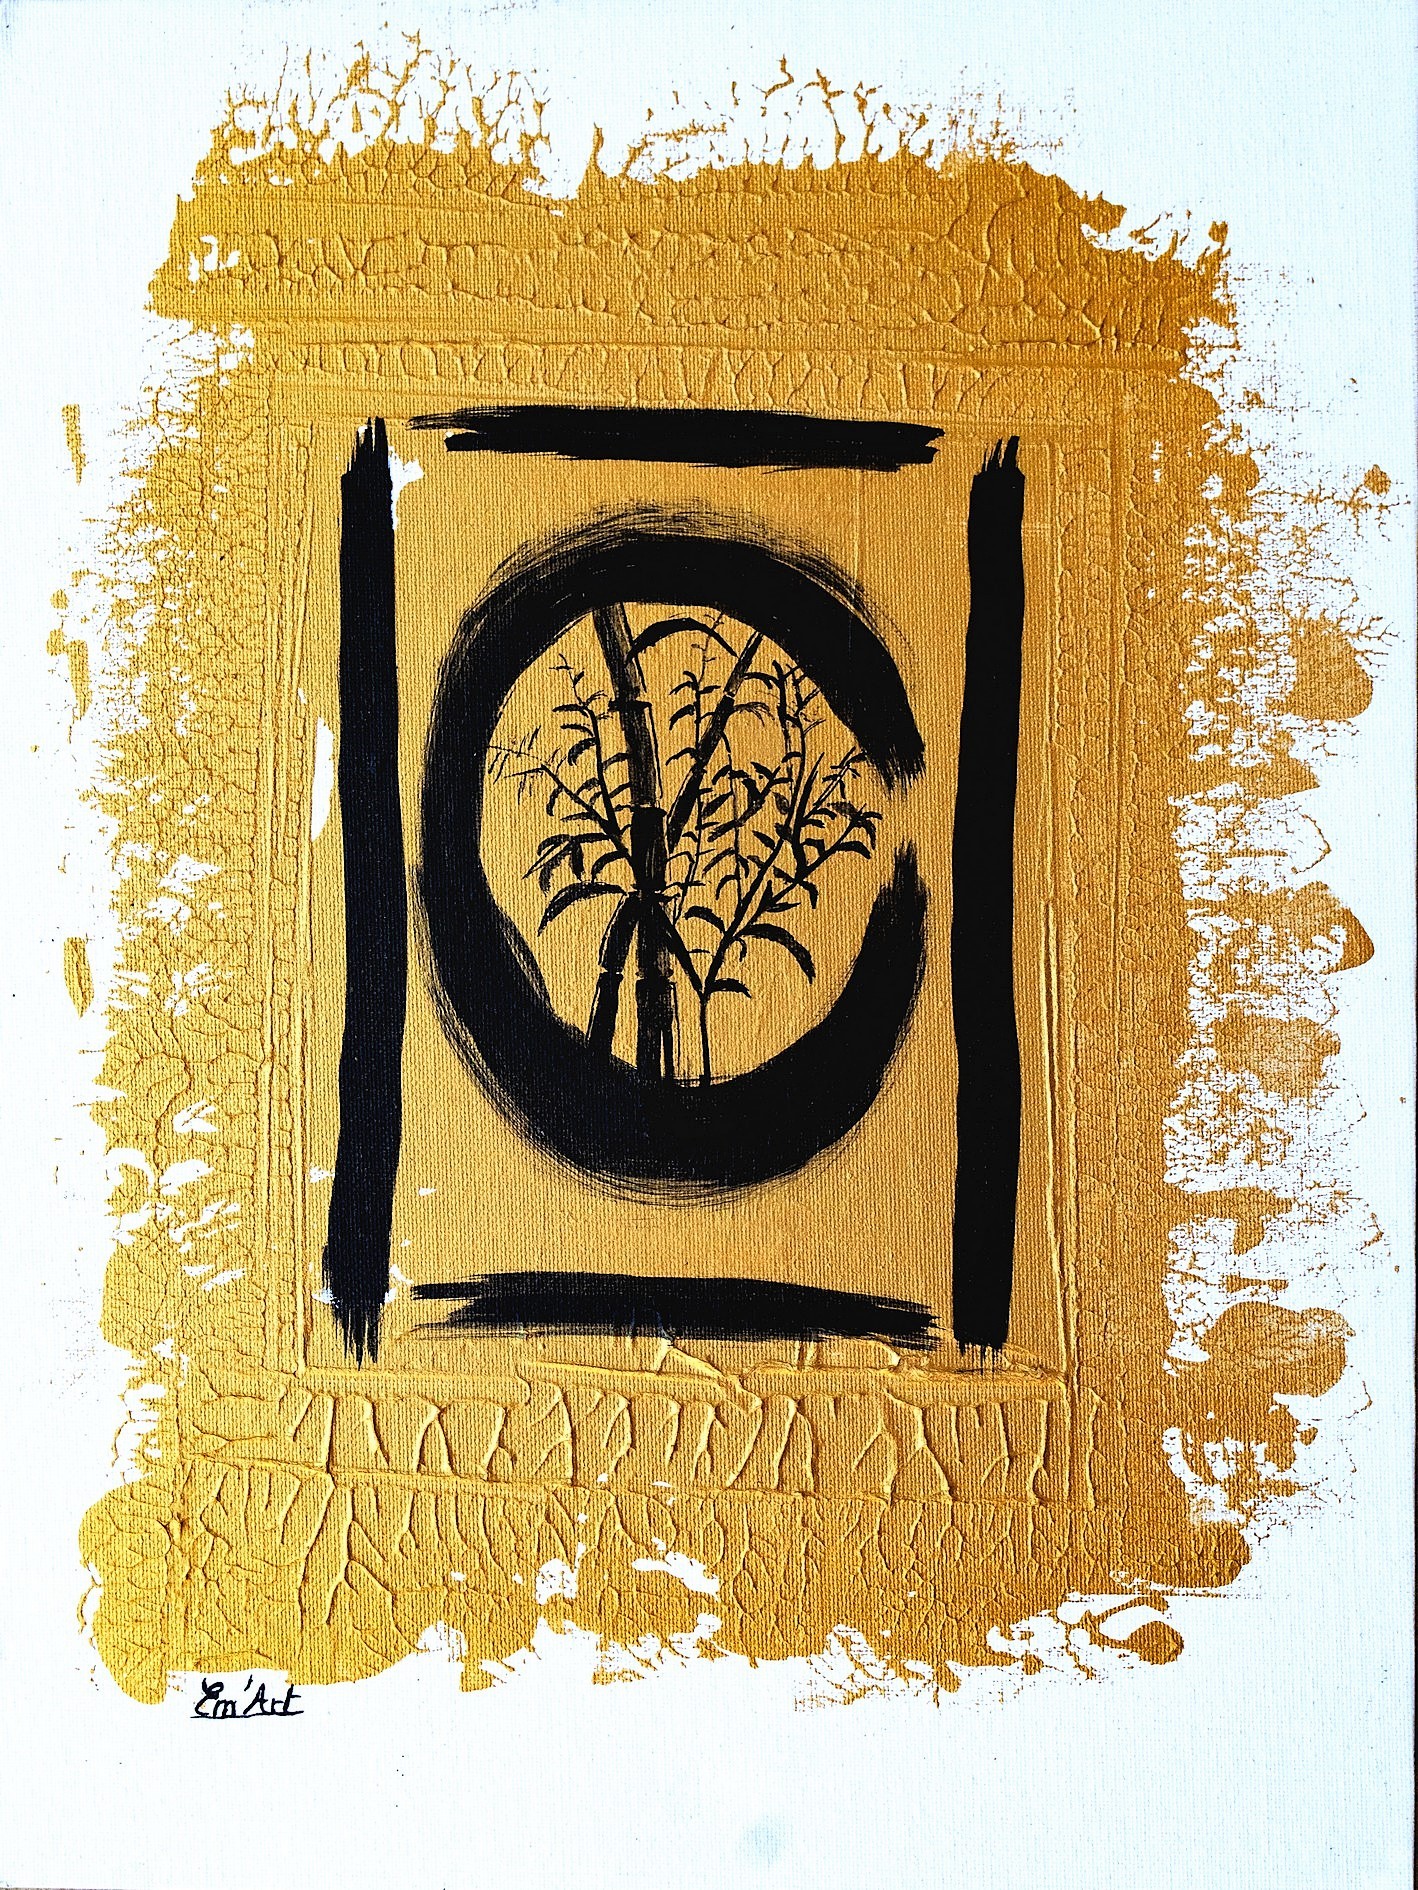 Bamboo Sumi-e, mixed painting by Emmanuelle Baudry